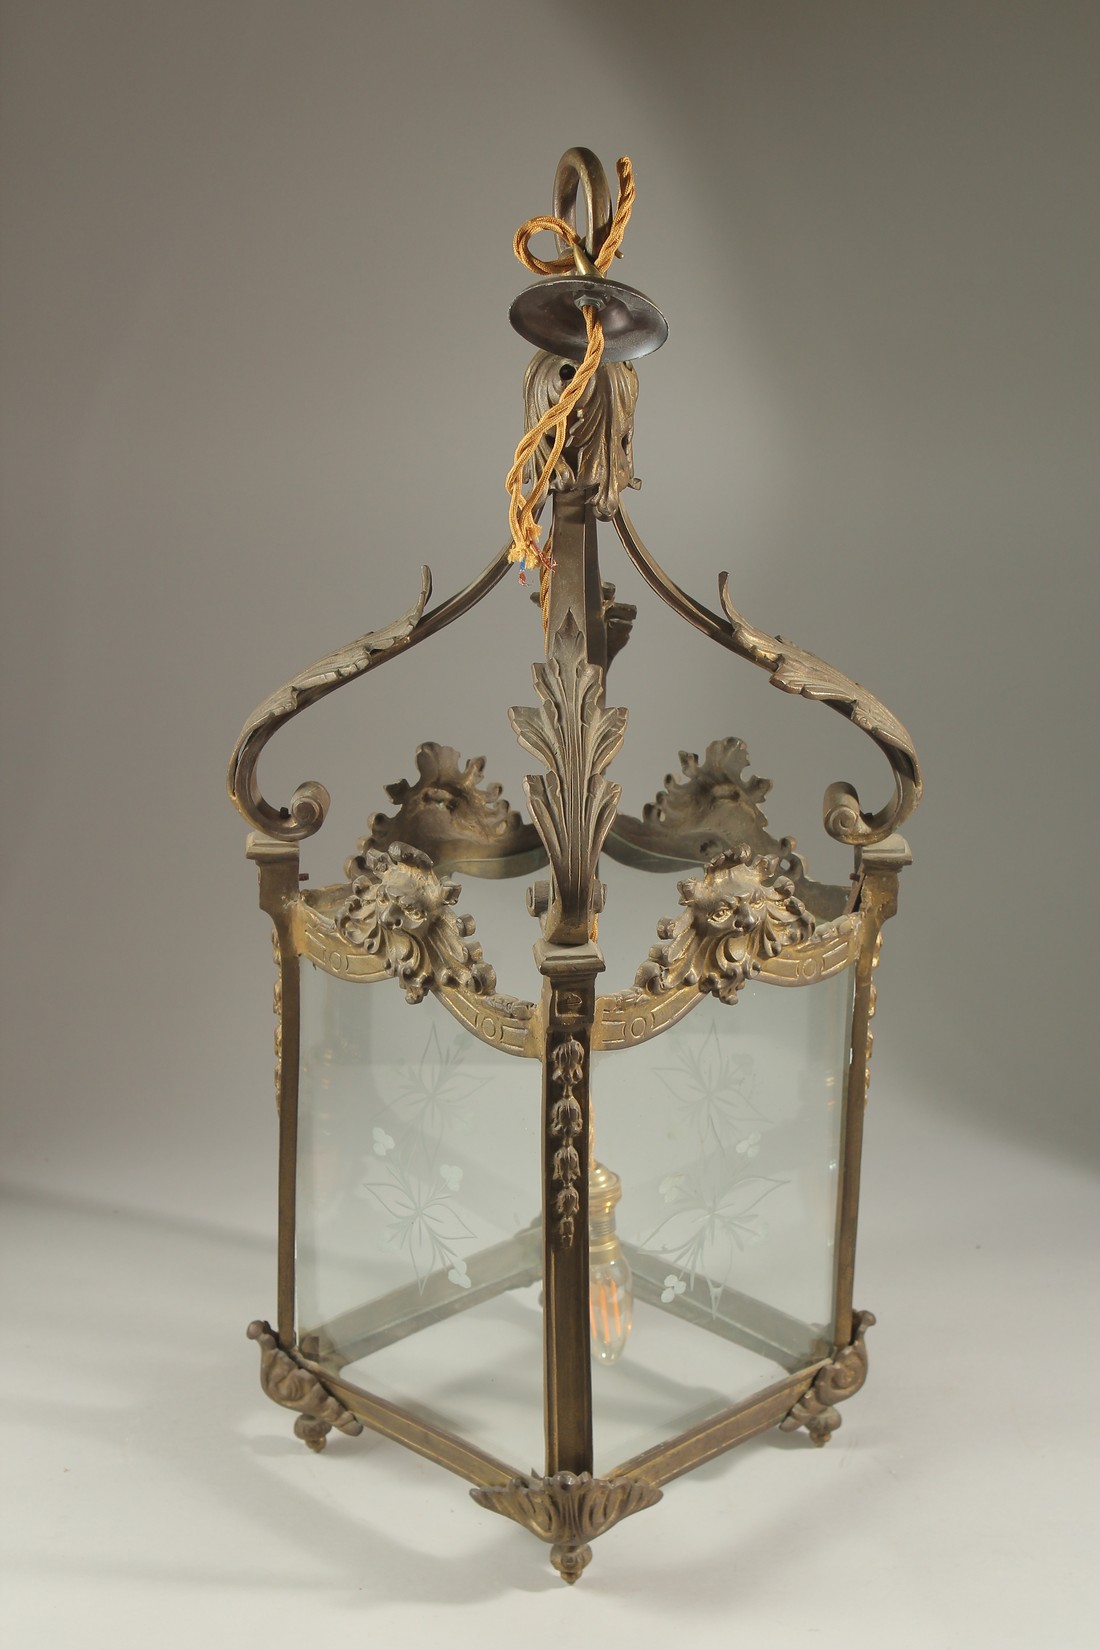 A 19TH CENTURY GILT METAL SQUARE LANTERN with etched glass panels, acanthus leaves and masks. - Image 2 of 3